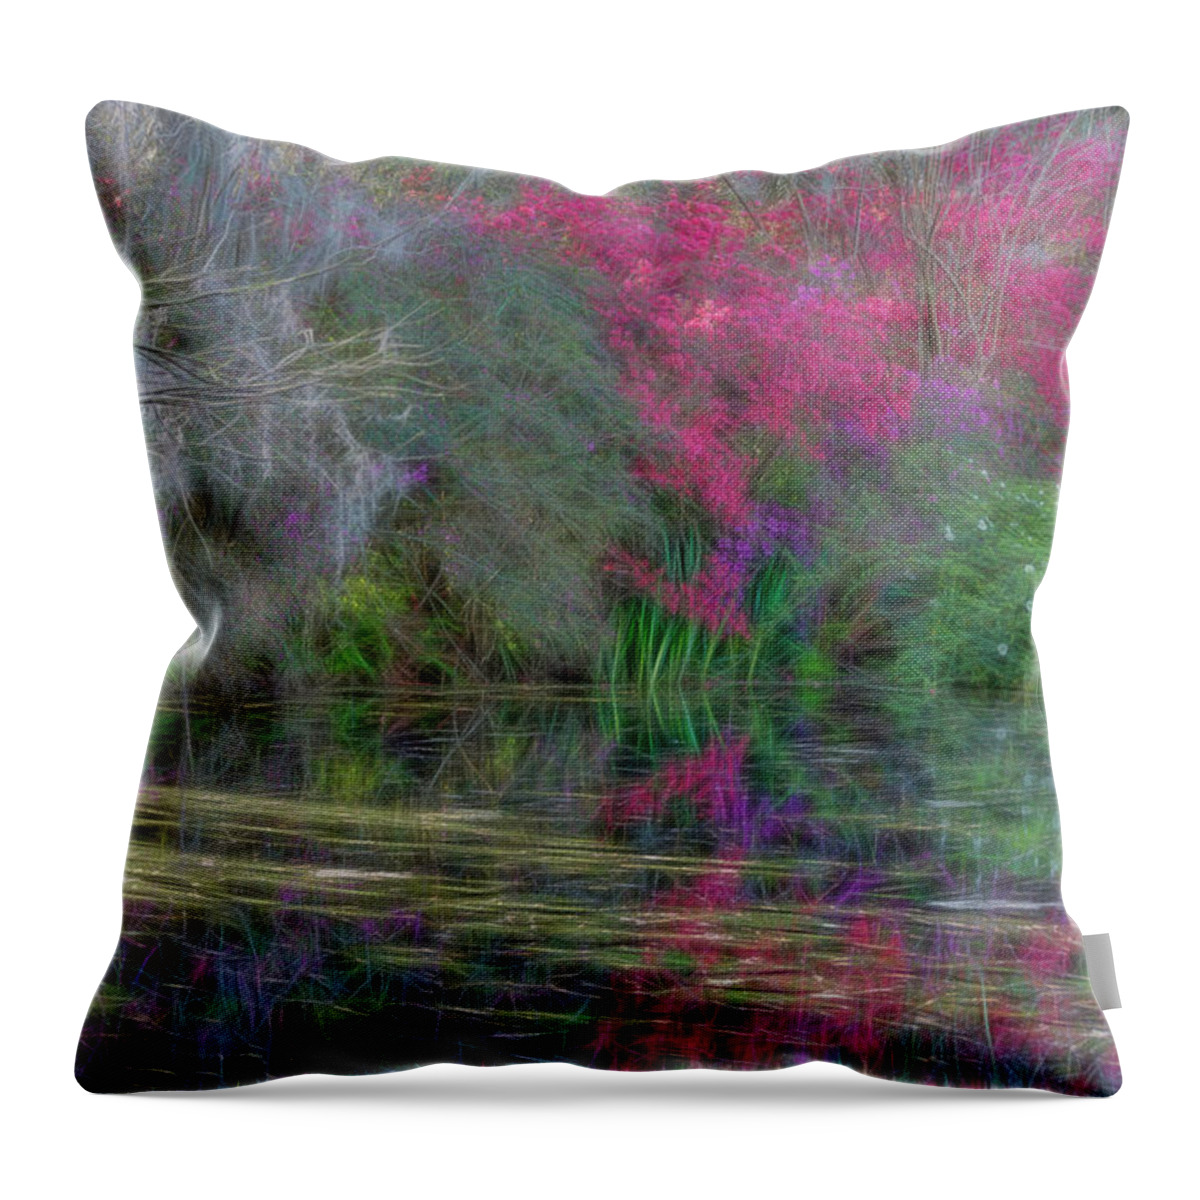 Dream Reflection Throw Pillow featuring the photograph Dream Reflection by Crystal Wightman